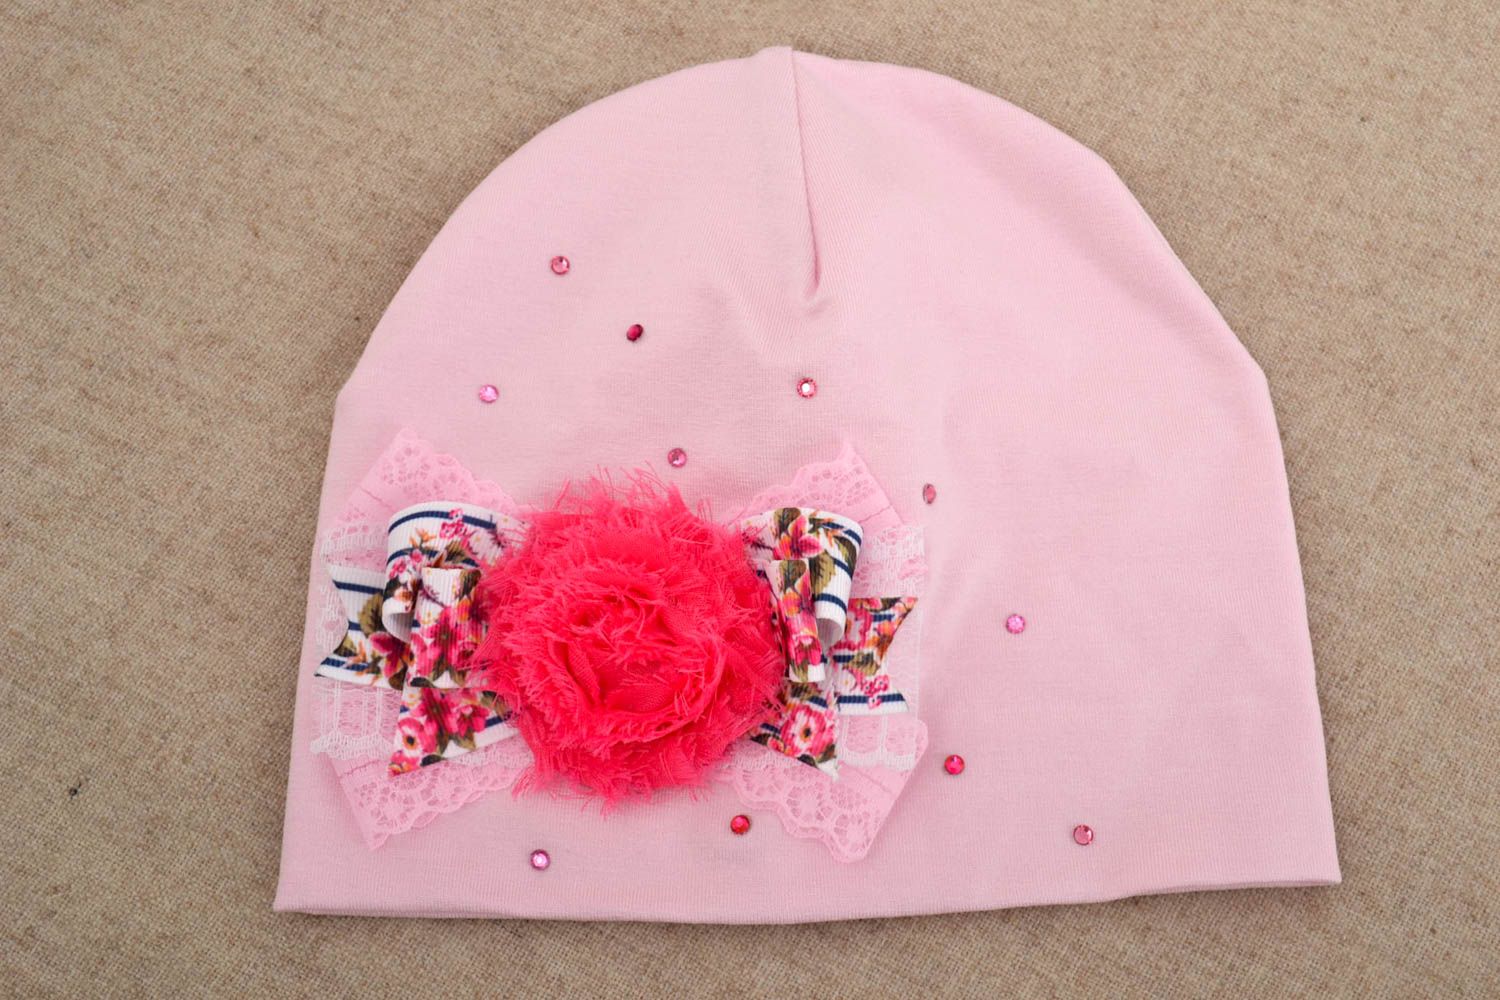 Beautiful handmade textile hat head accessories fashion trends gifts for her photo 1